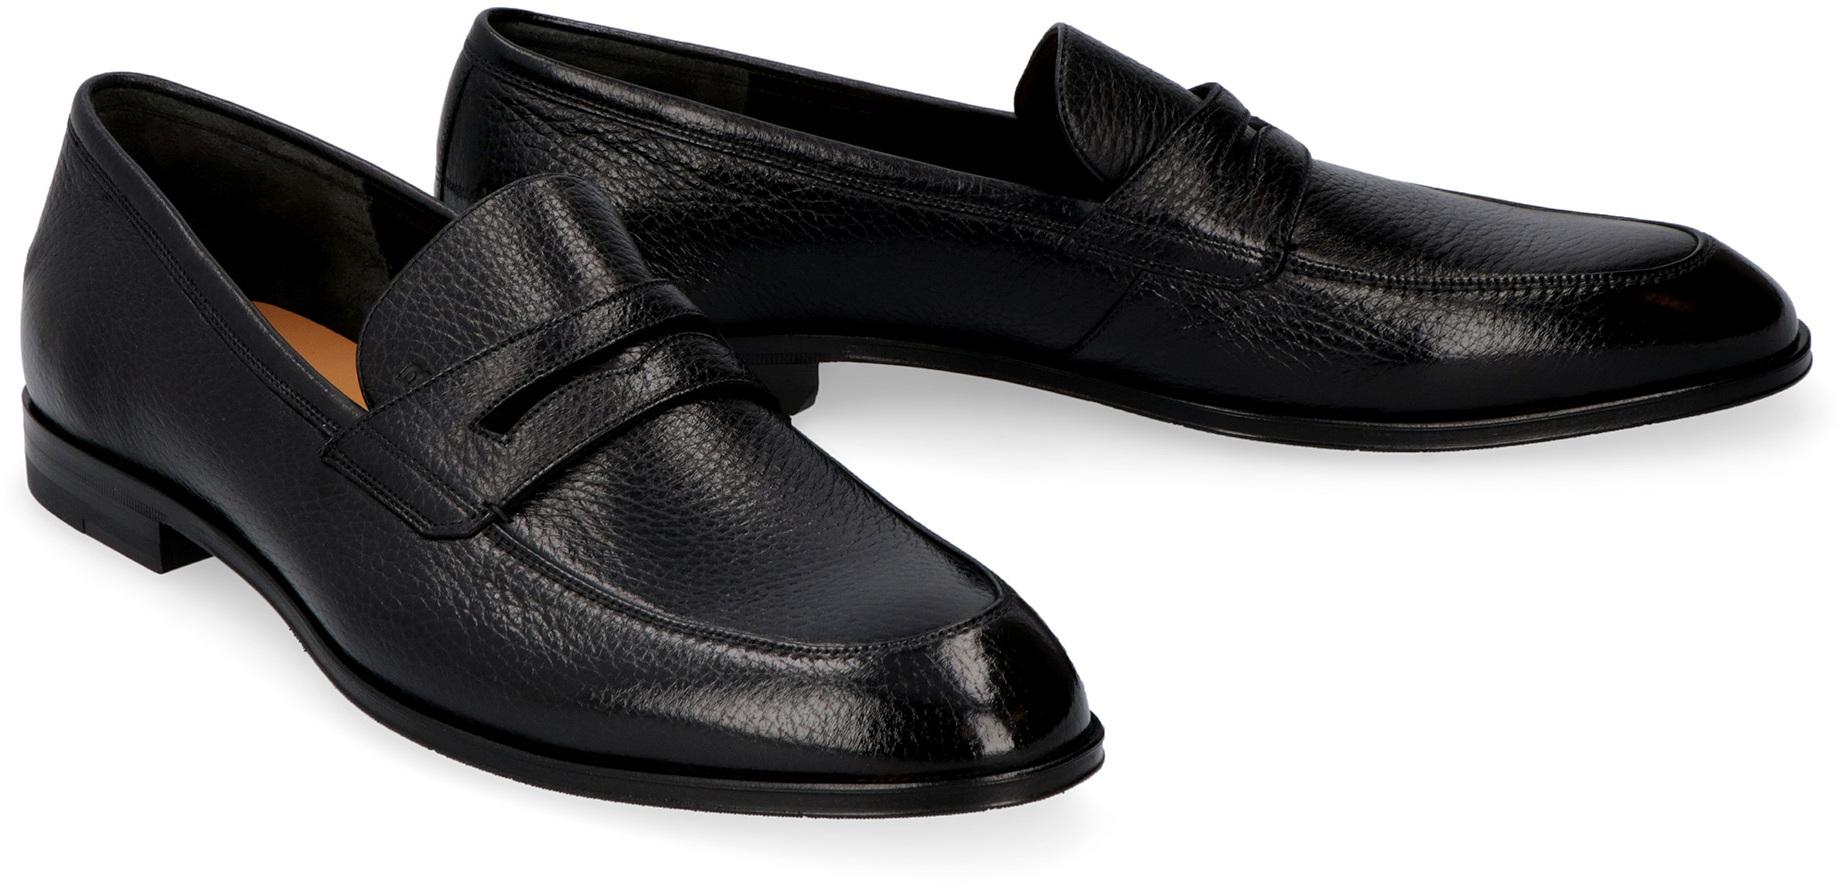 Bally Webb Pebbled Leather Loafers in Black for Men - Lyst